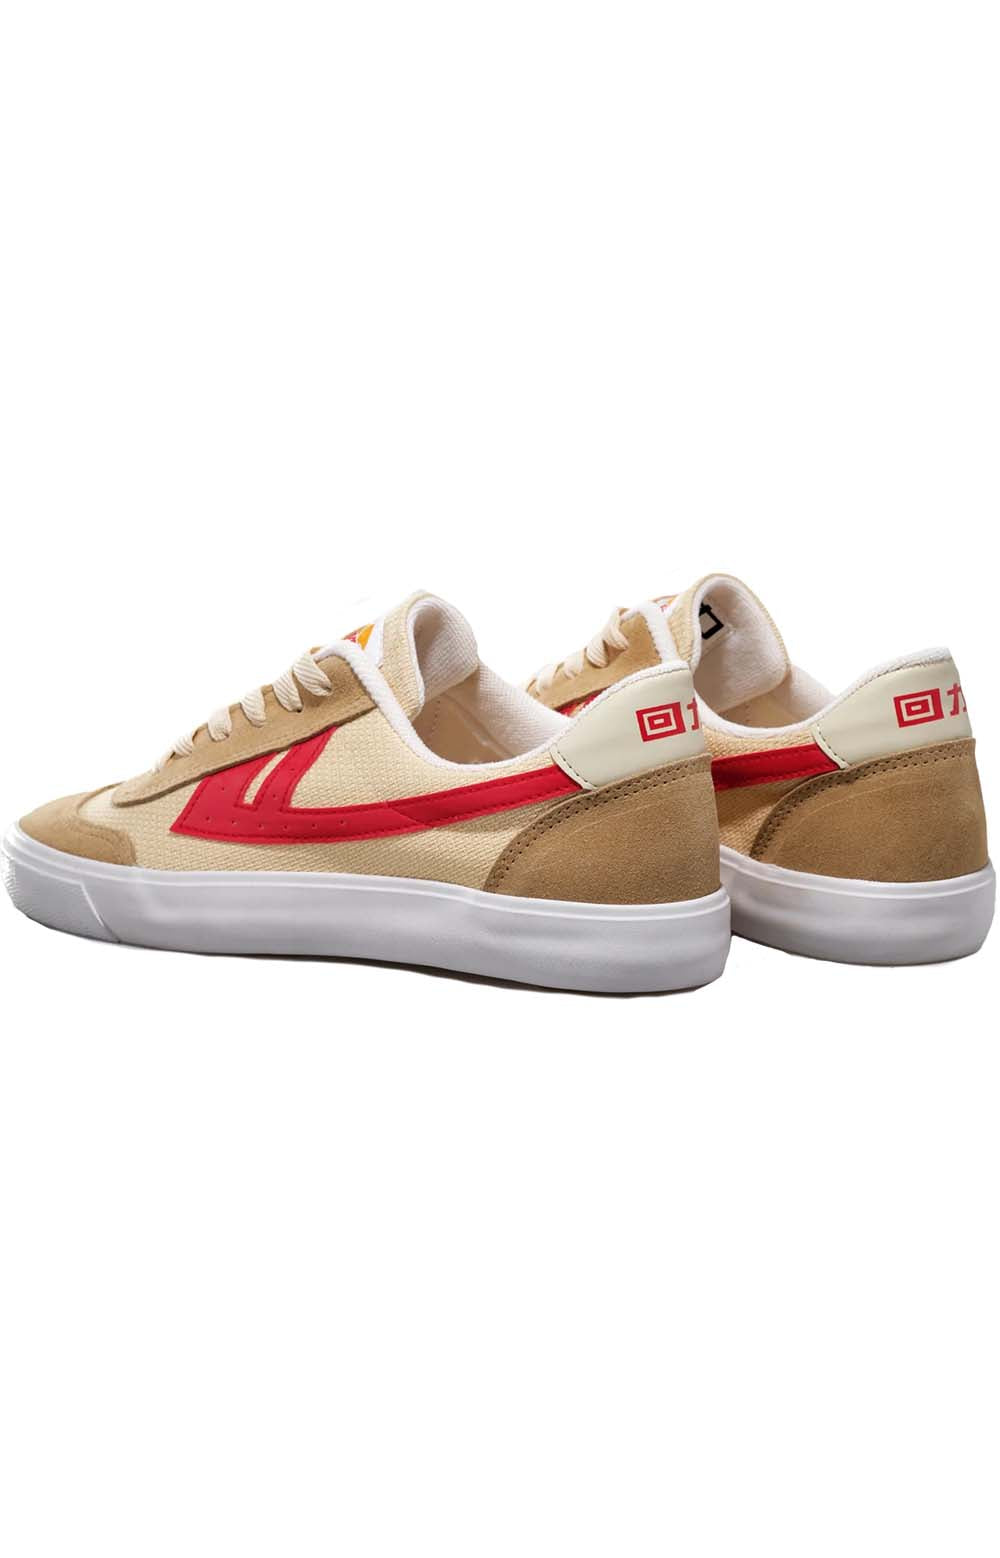 Ace Shoes - Sand/Red